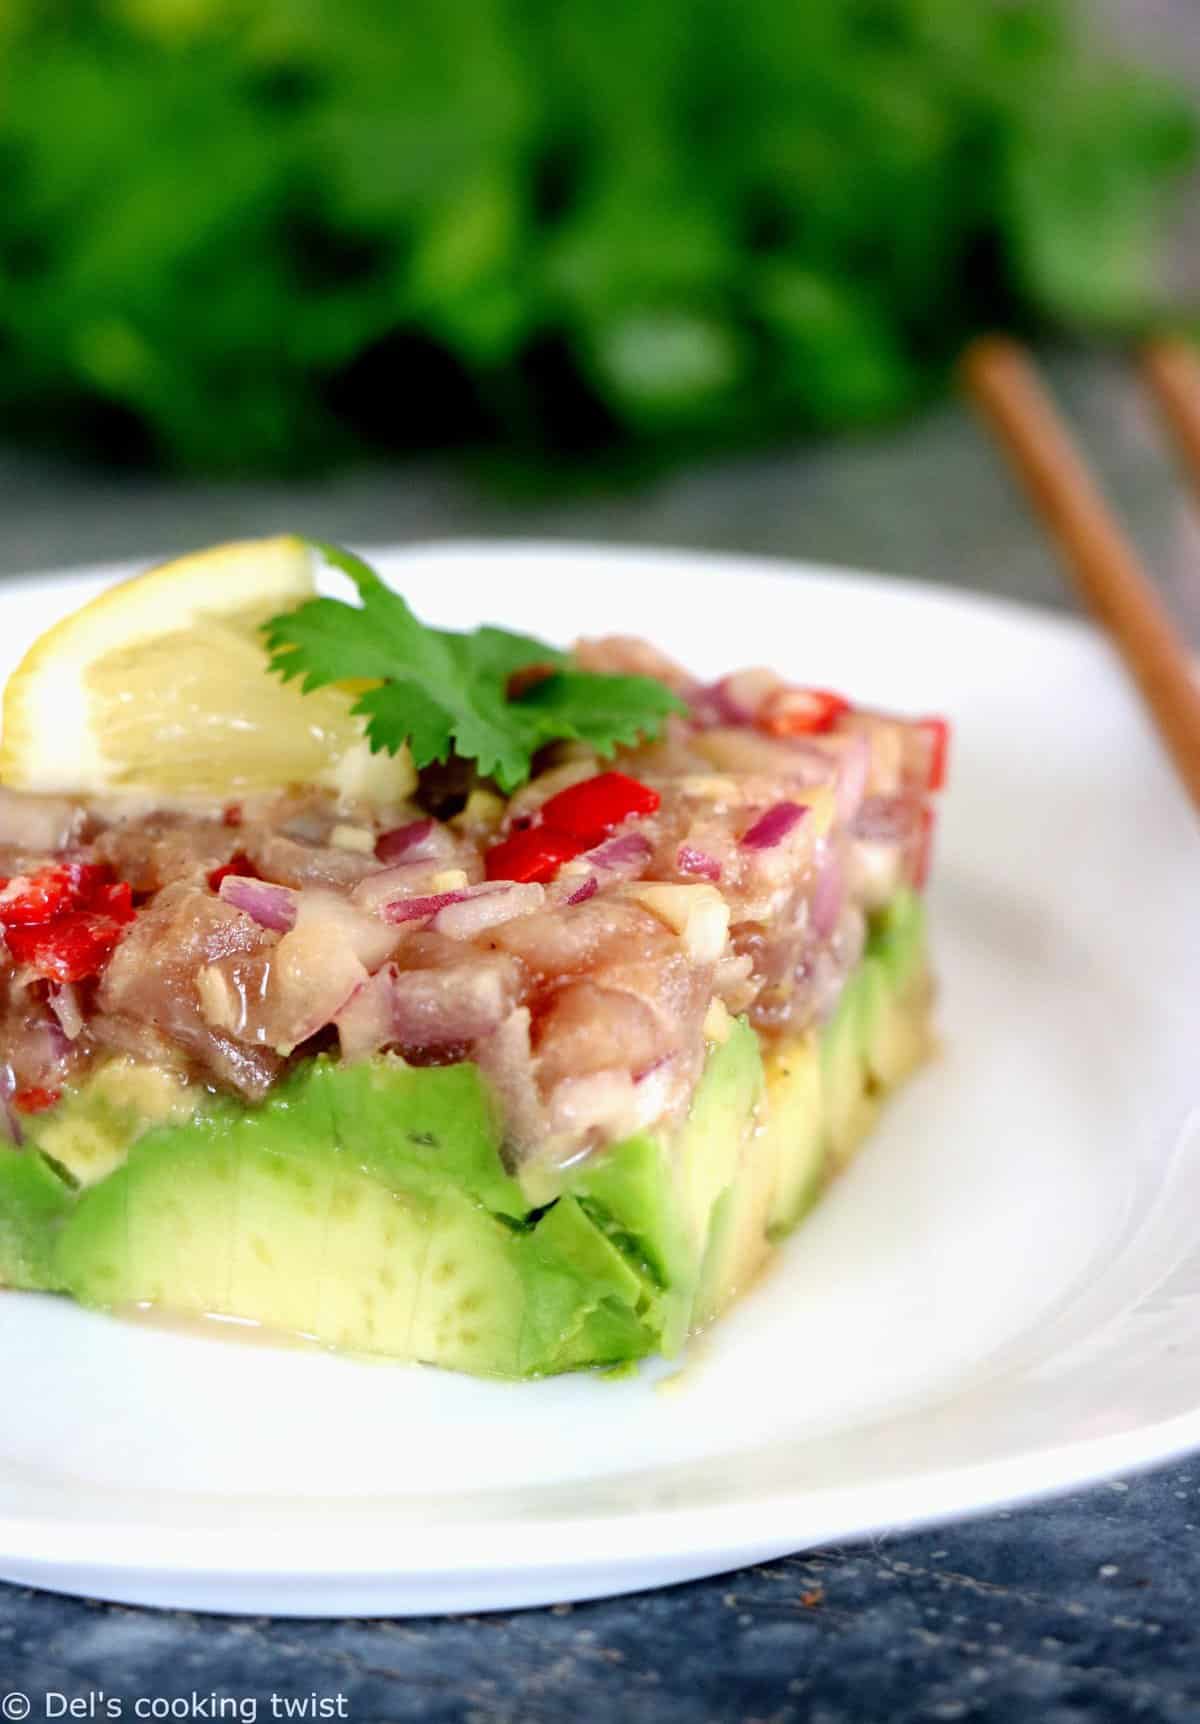 Tuna Tartare with a Ginger Soy Dressing